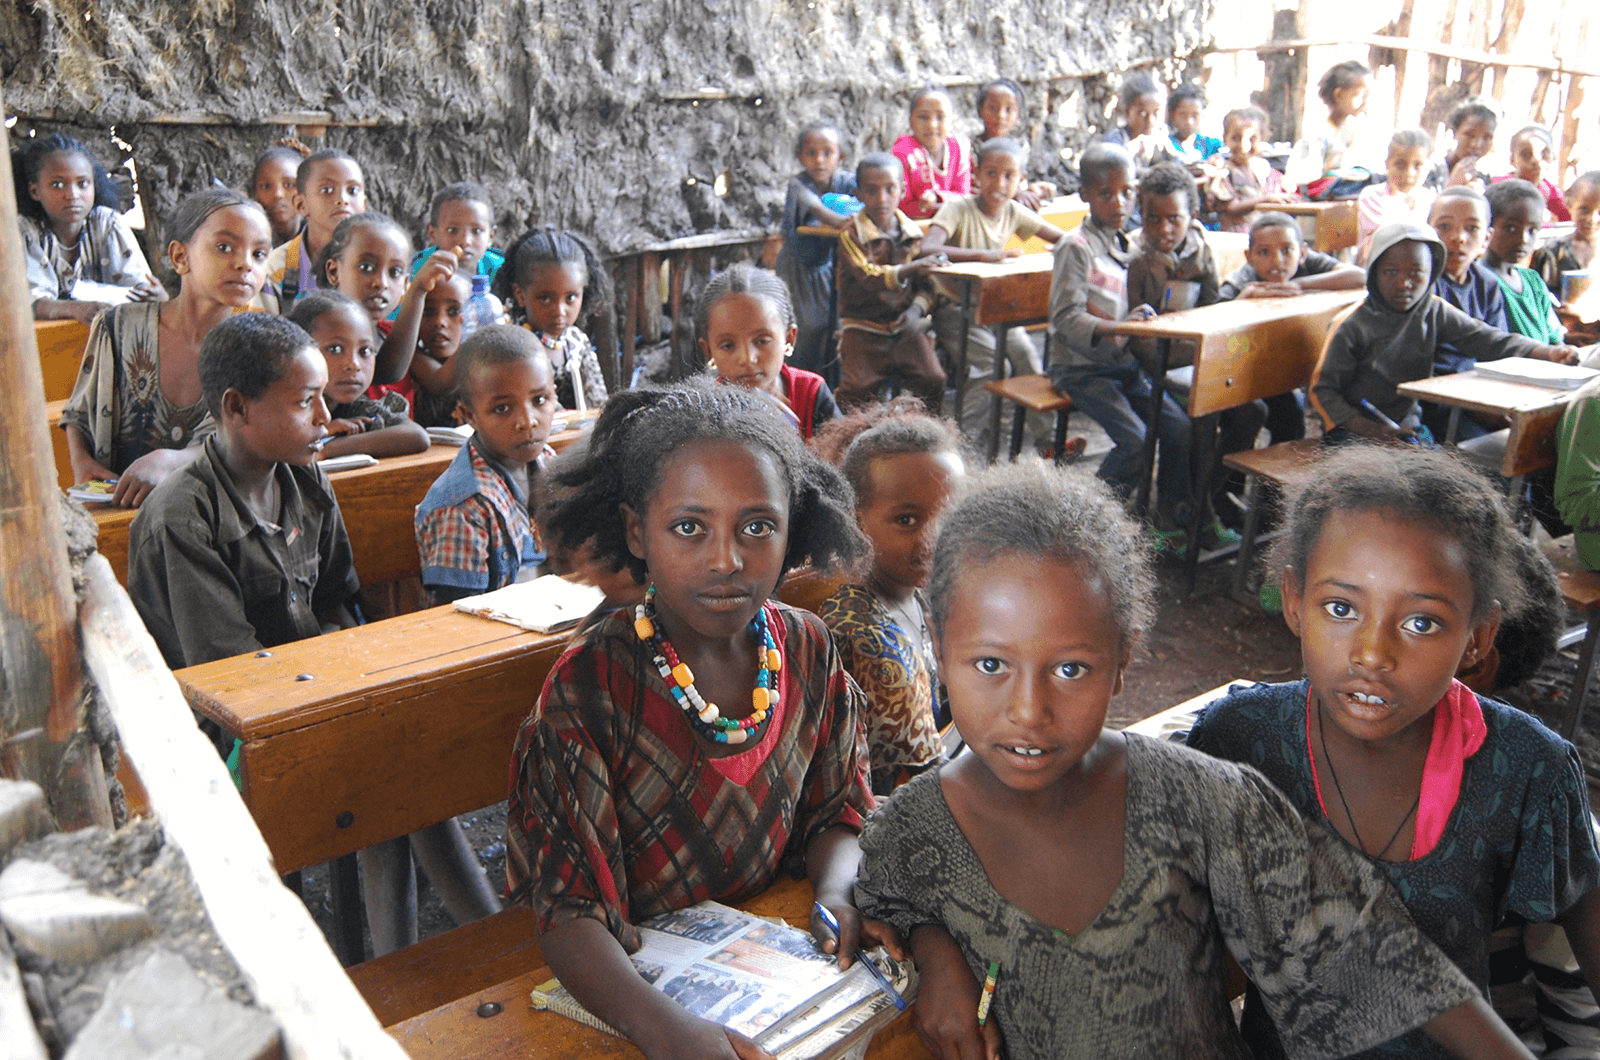 Children look at the camera at the rural school Toastmaster Lesley Stephenson and her team rebuilt in Mehoni, Ethiopia. 